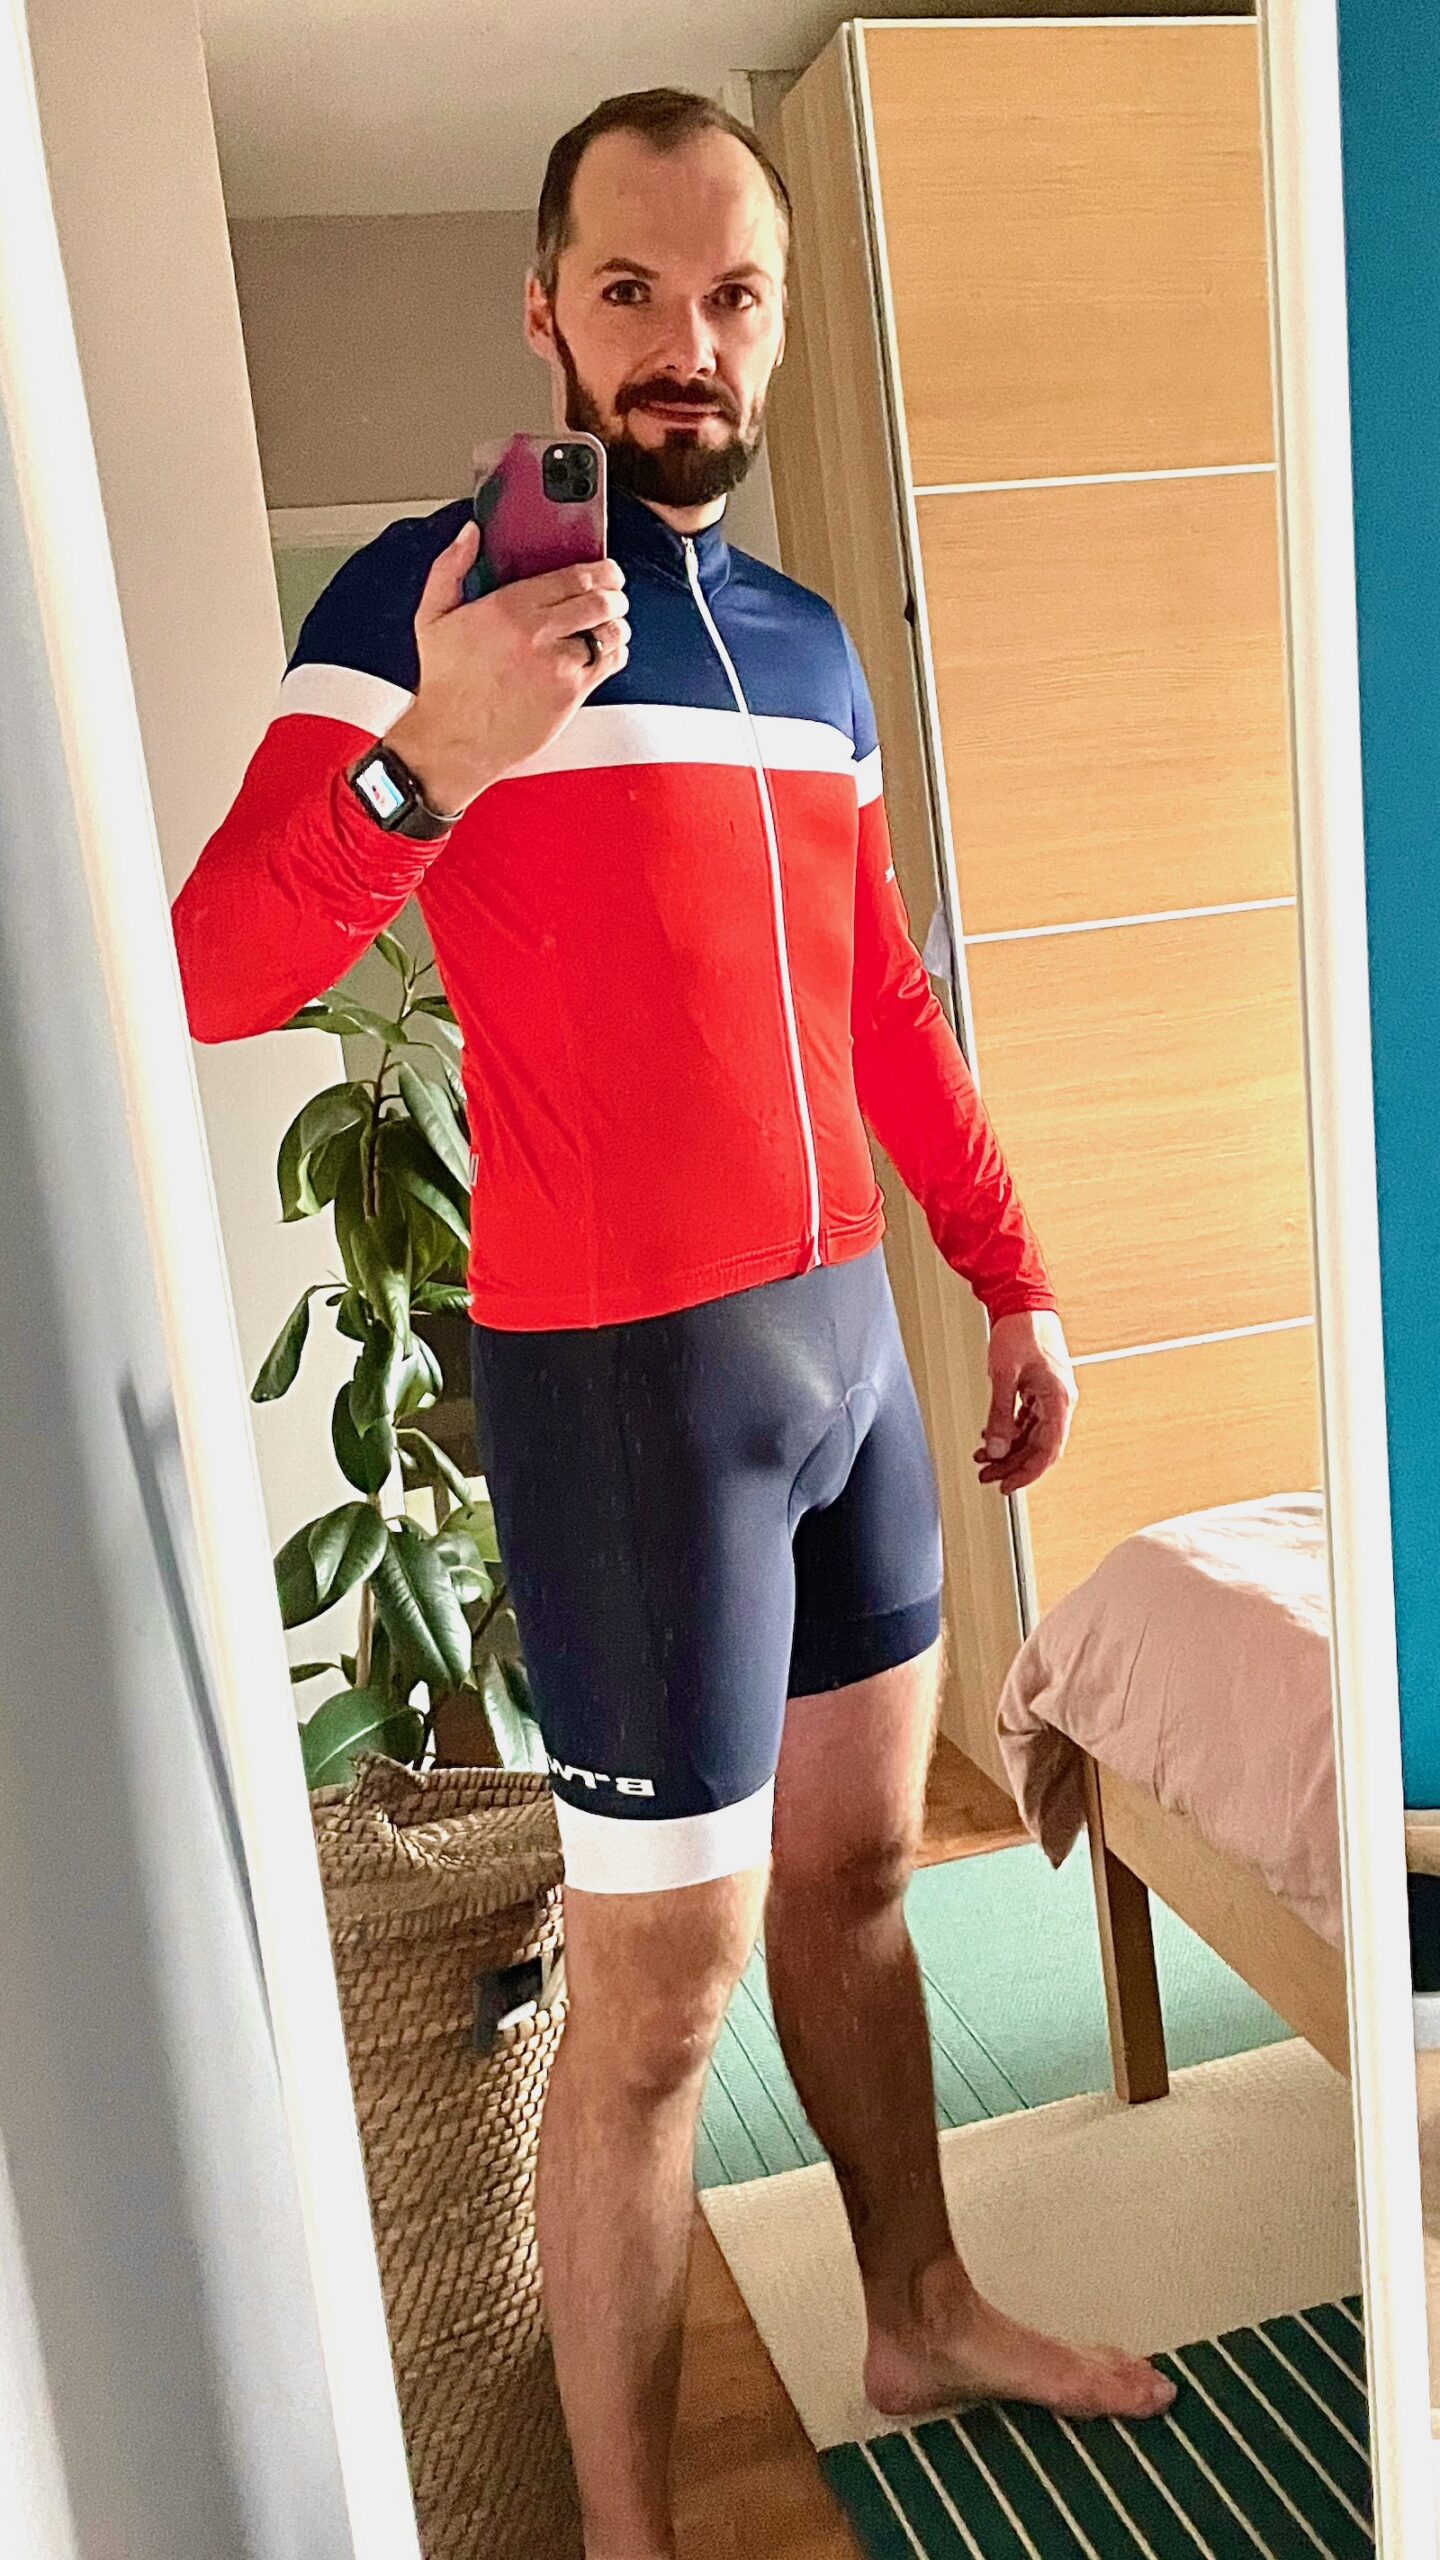 Switch in Sportful carbon and red jersey with plain black lycra cycle shorts